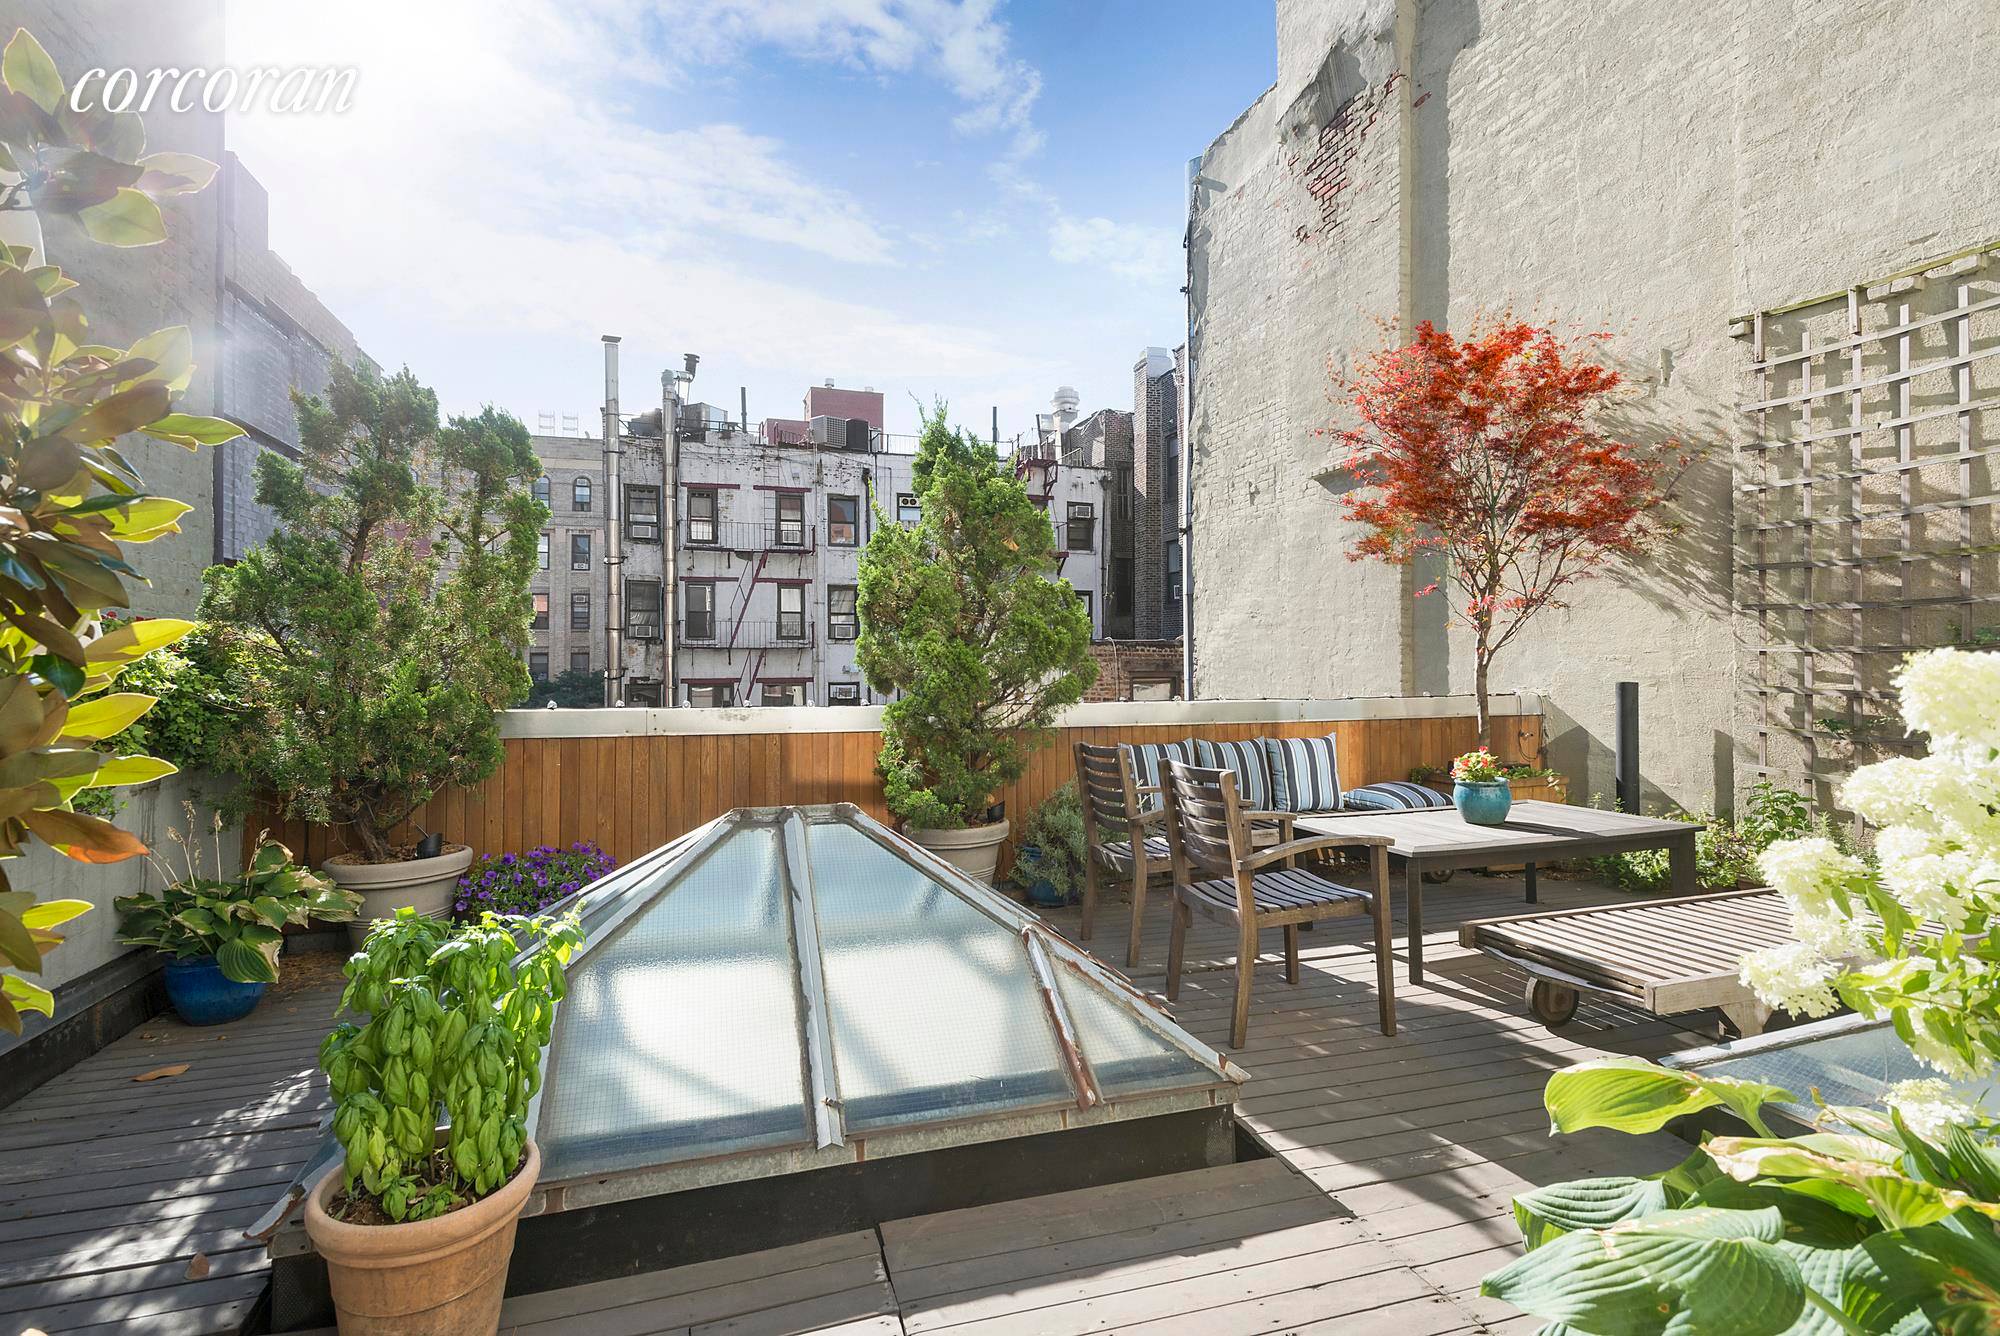 238 Mulberry Street, Prime Nolita SoHo Loft ; A beautiful furnished 2 Bedroom, 2 Bath home with a 25' x 14' outdoor terrace.